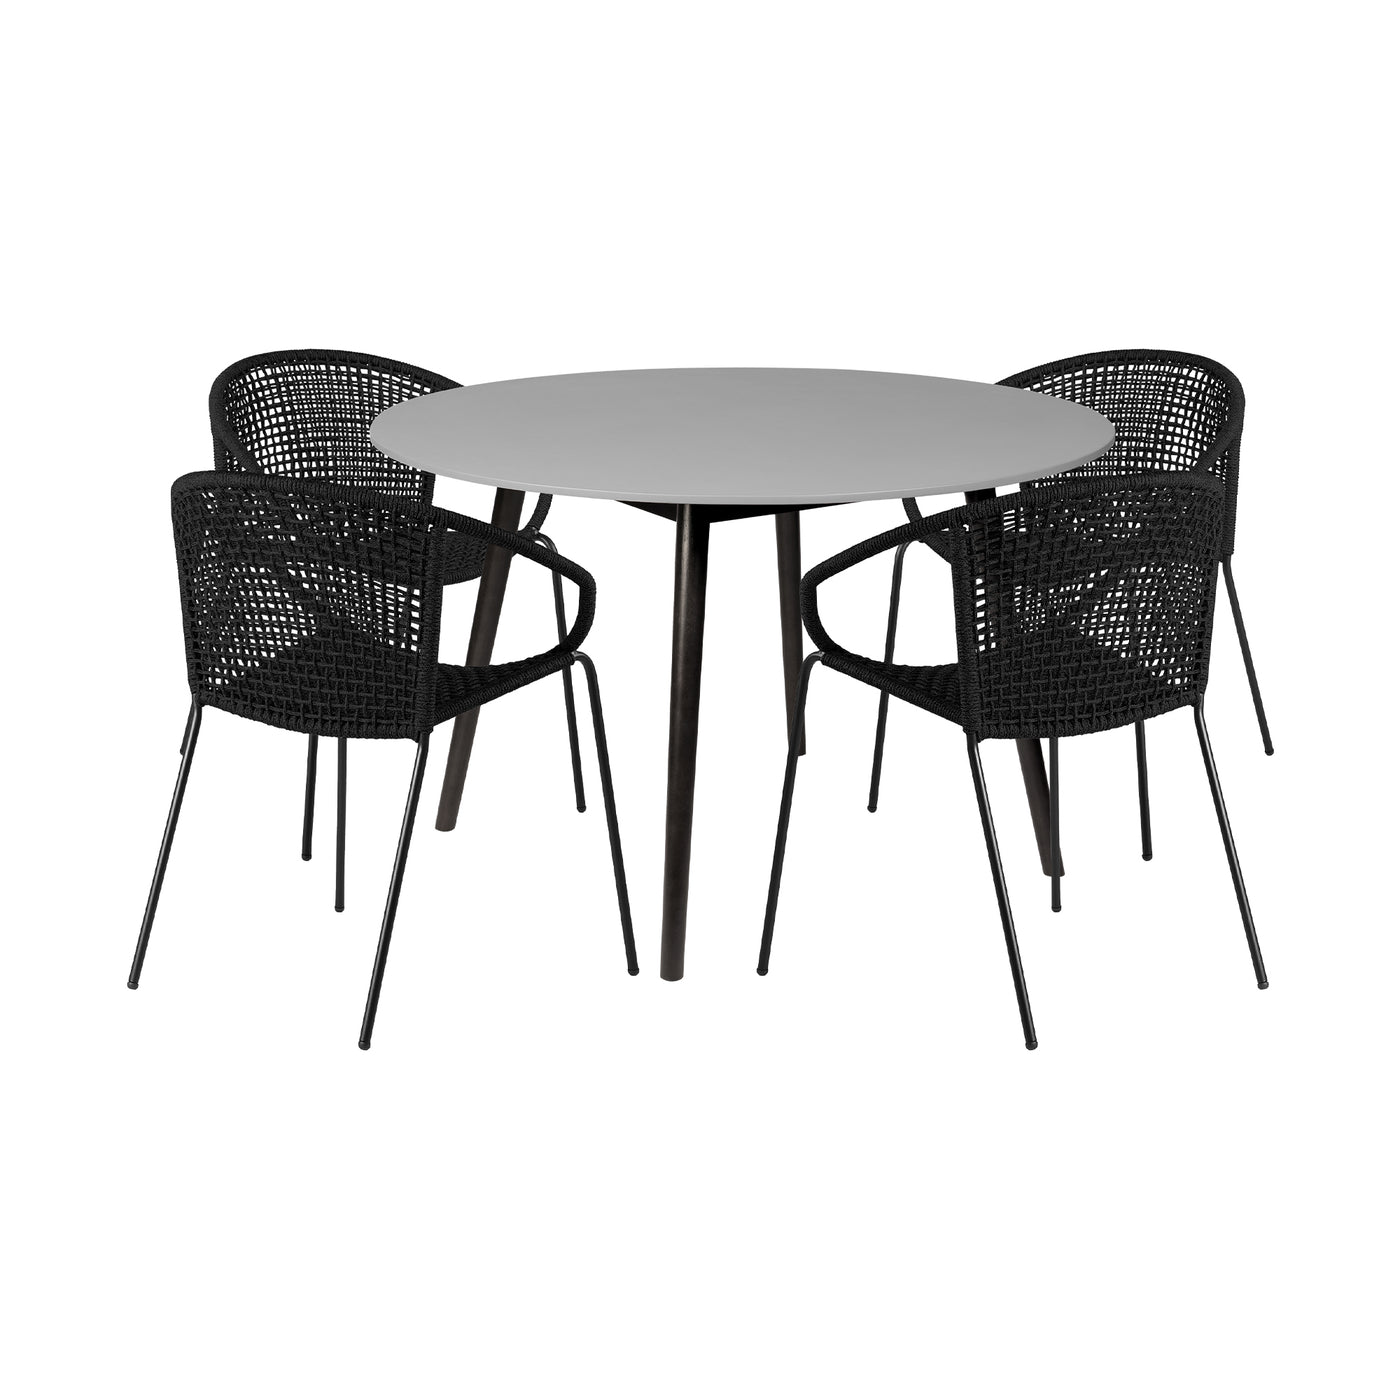 Kylie & Snack Outdoor Dining Set